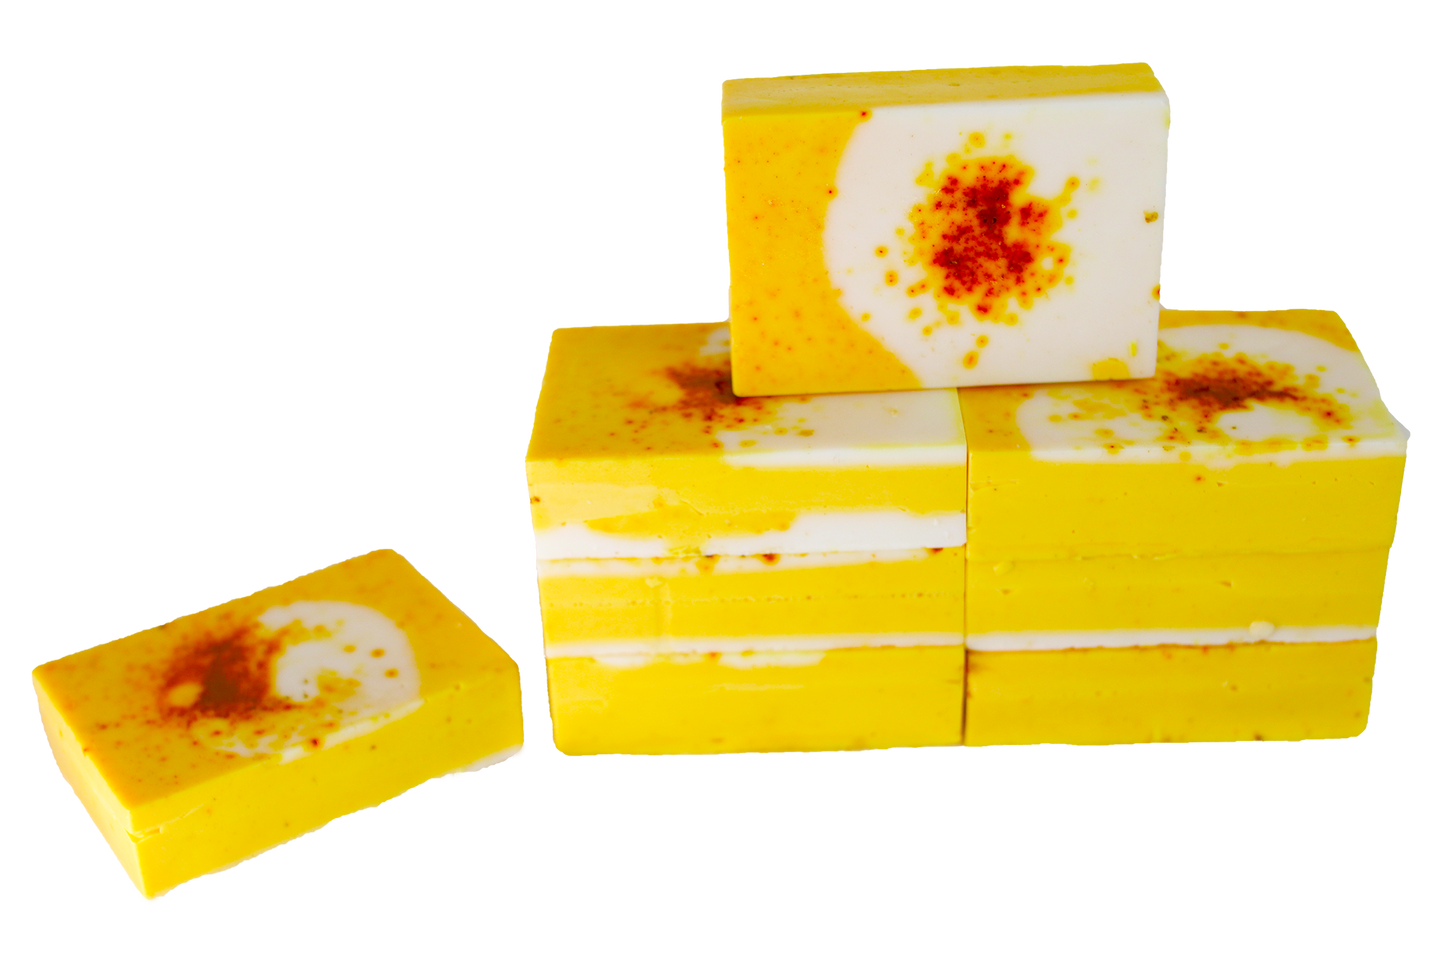 Customized Variety Soap Pack | Natural Restore | Turmeric & Hemp Restore | Skin Care Products | All Natural Ingredients | Habbie Beauty Supplies - Habbie Enterprise